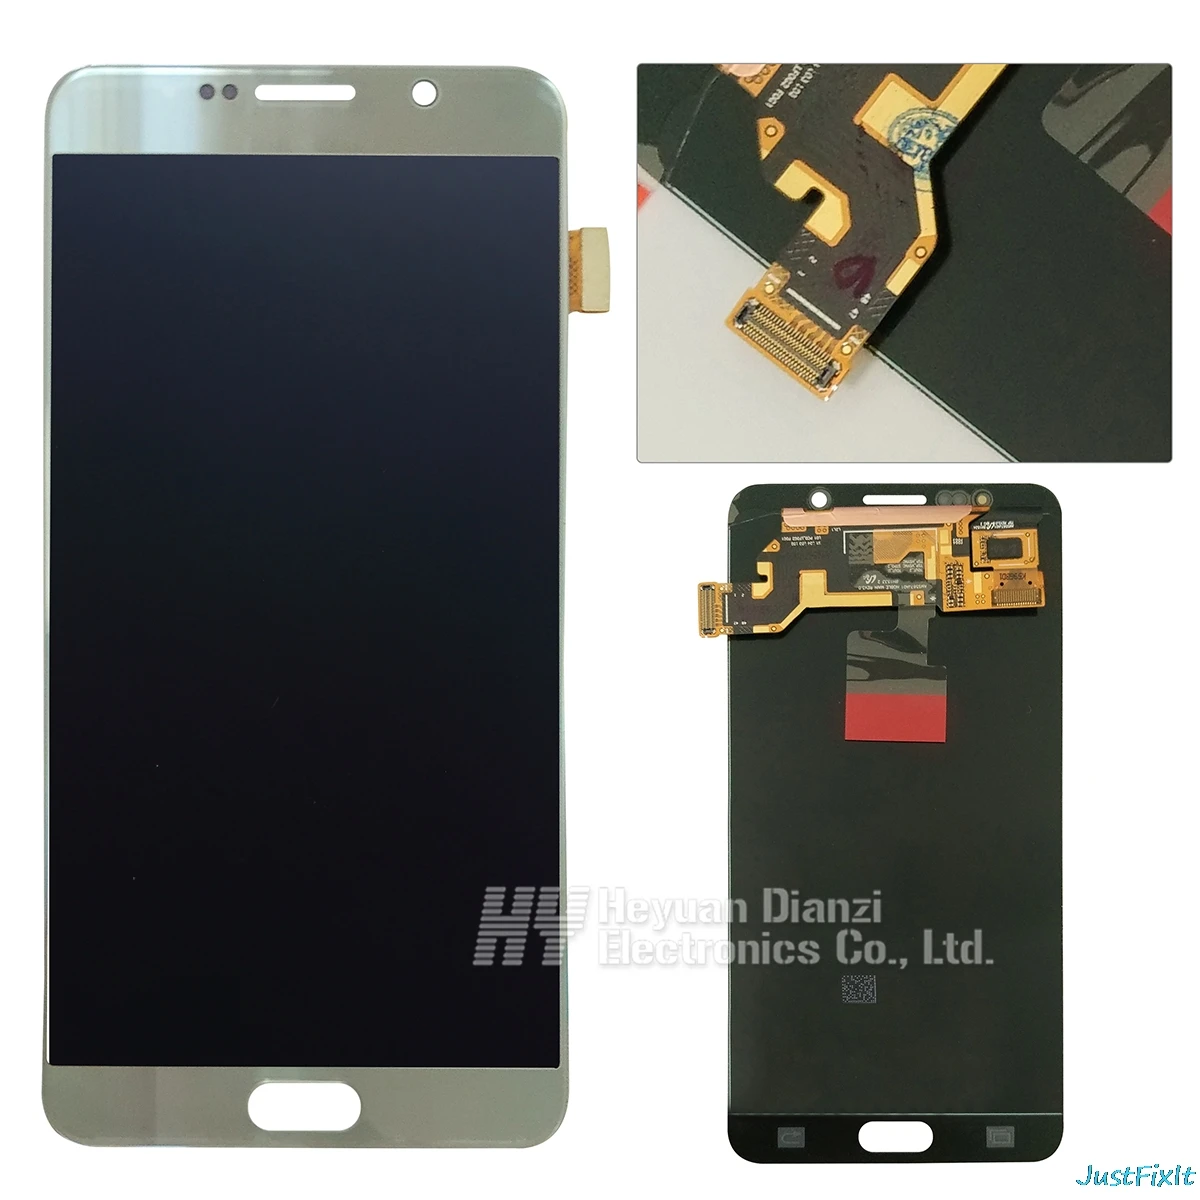 

For Samsung Galaxy Note 5 N920 N920F N920A N920T N920C N920V N920W8 Burn-in shadow LCD Display Touch Screen Digitizer Assembly